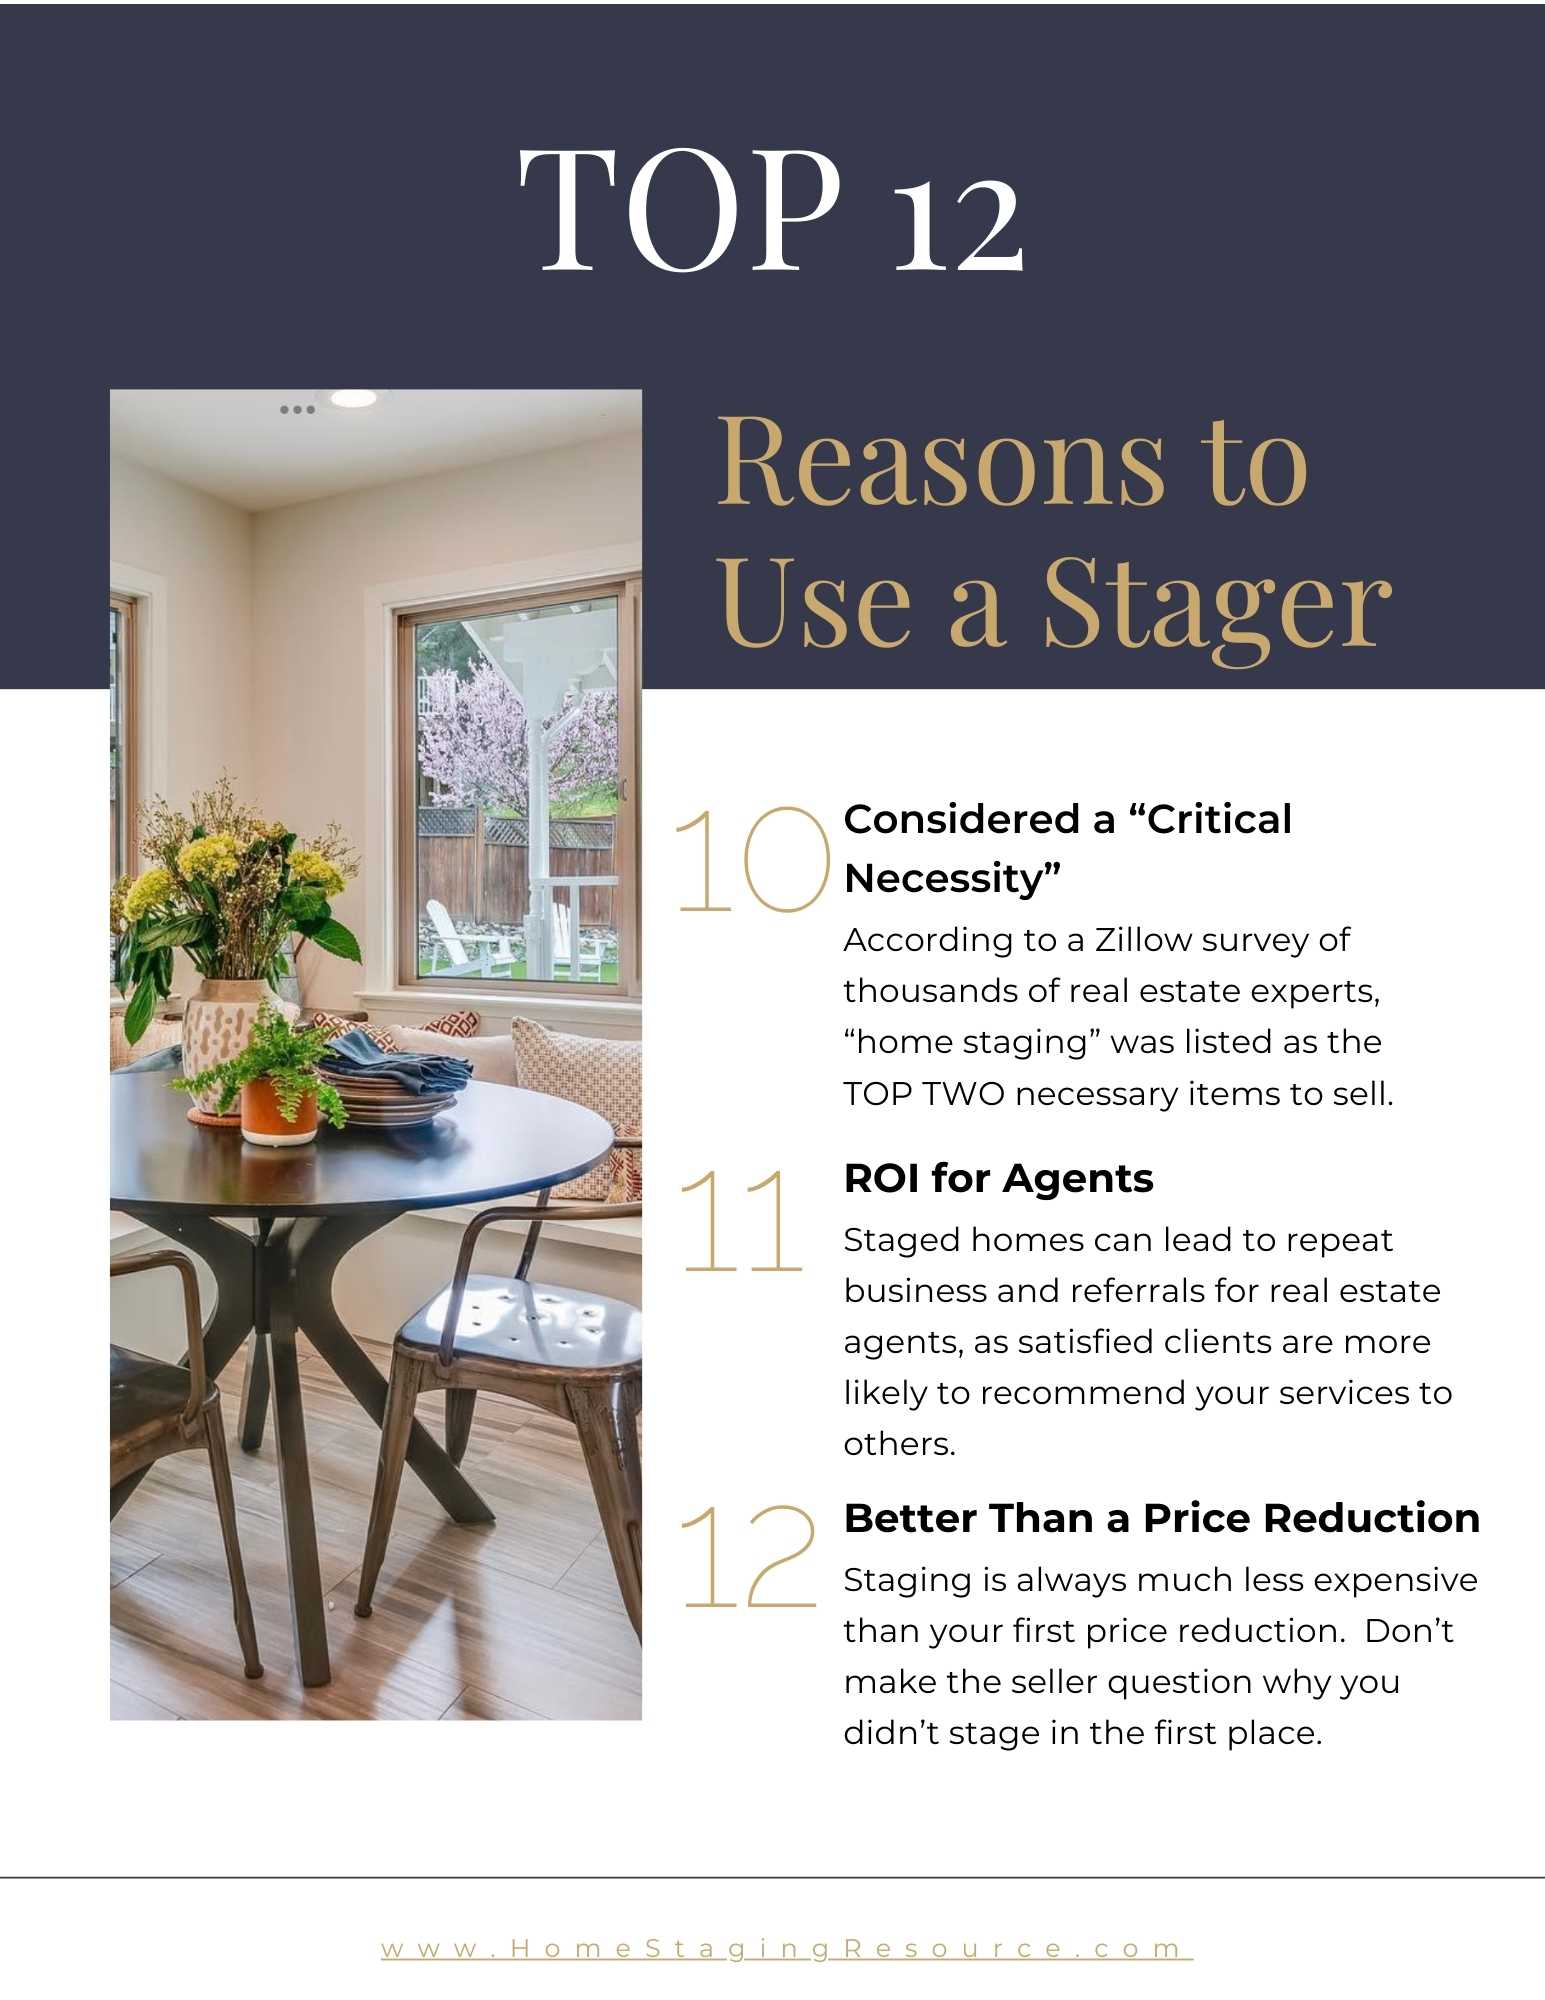 Why Staging Matters - HSR - Top 12 Reasons to Stage